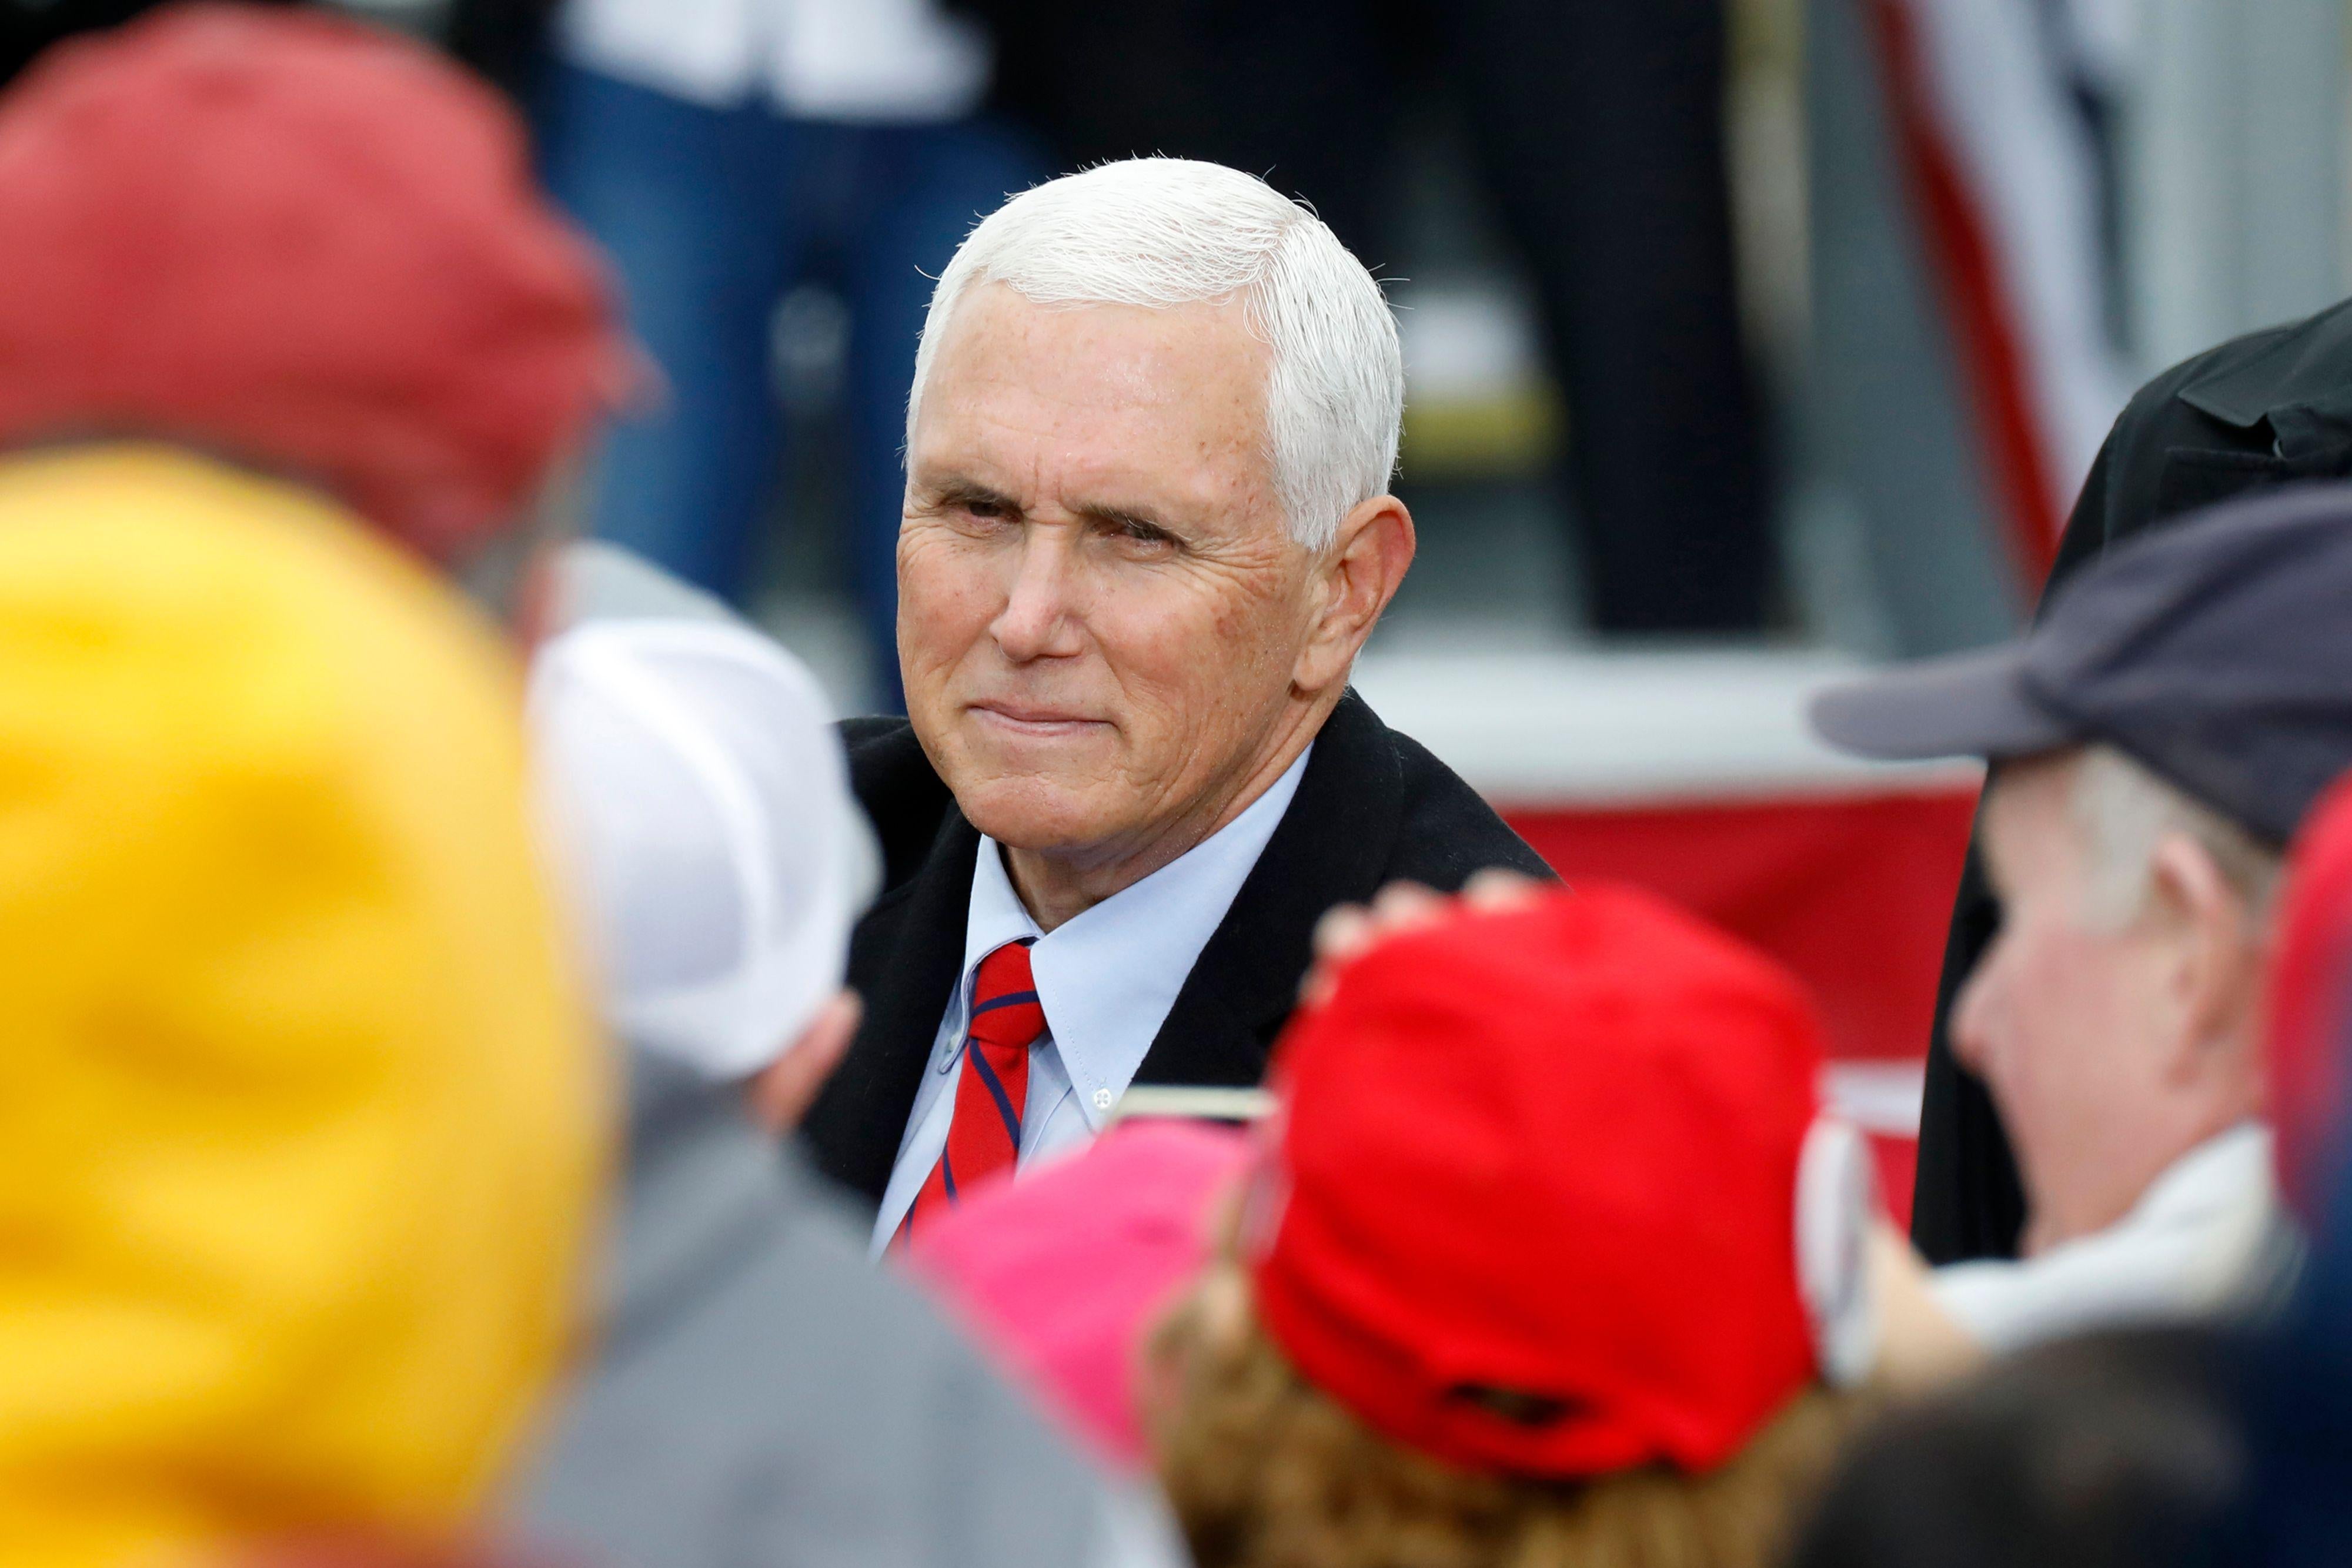 Vice President Mike Pence greets supporters after a campaign event at Oakland County International Airport in Waterford, Michigan, on October 22, 2020.